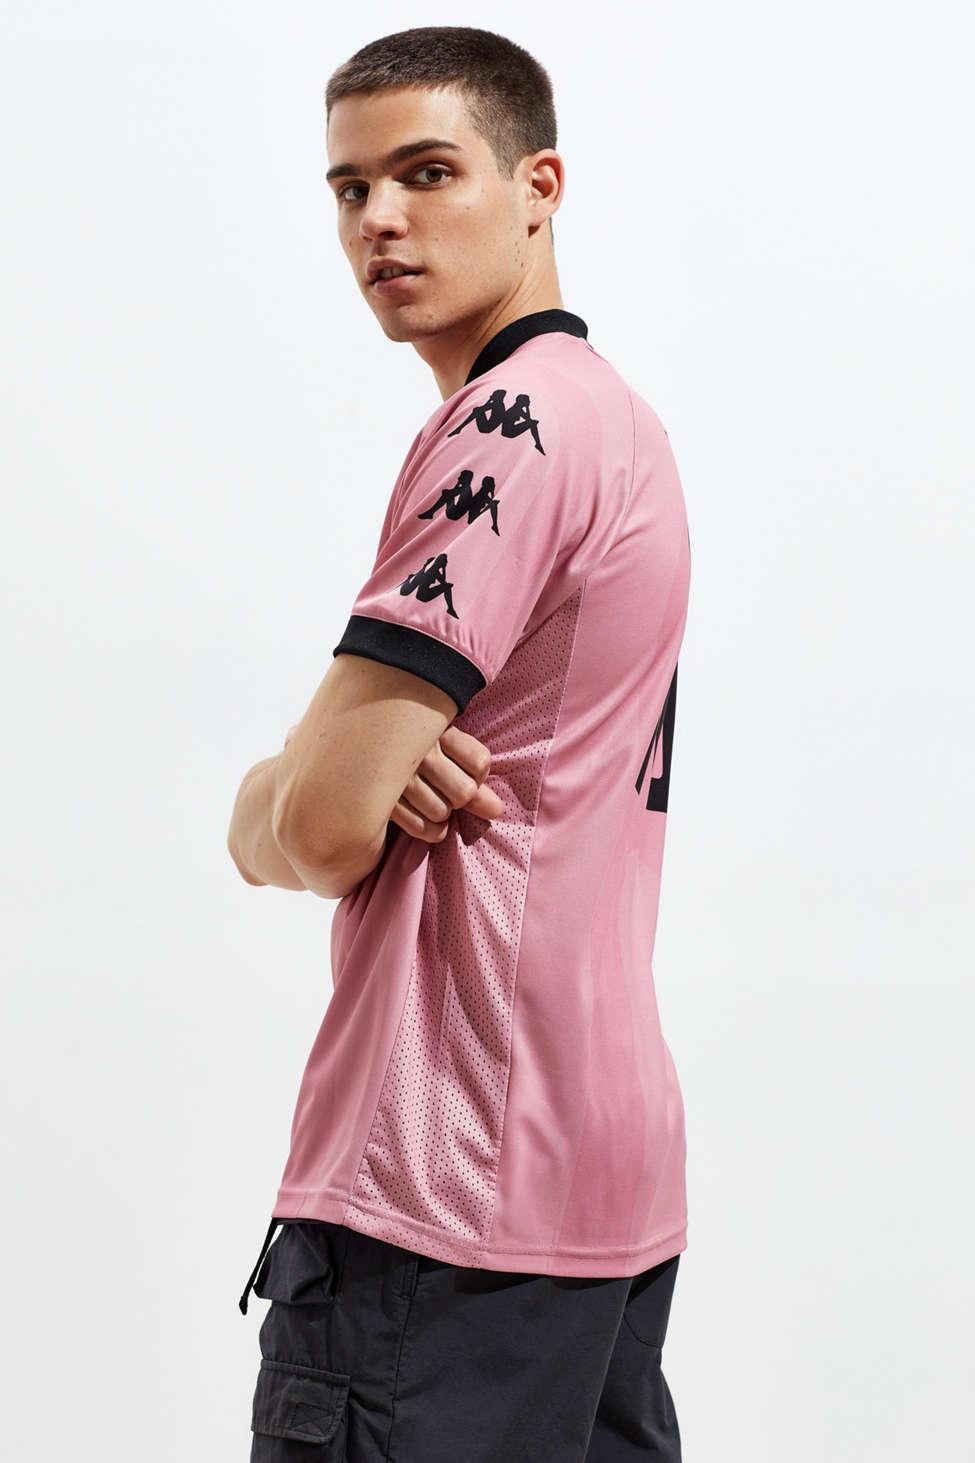 Kappa Authentic Tabe Soccer Jersey in Pink for Men - Lyst